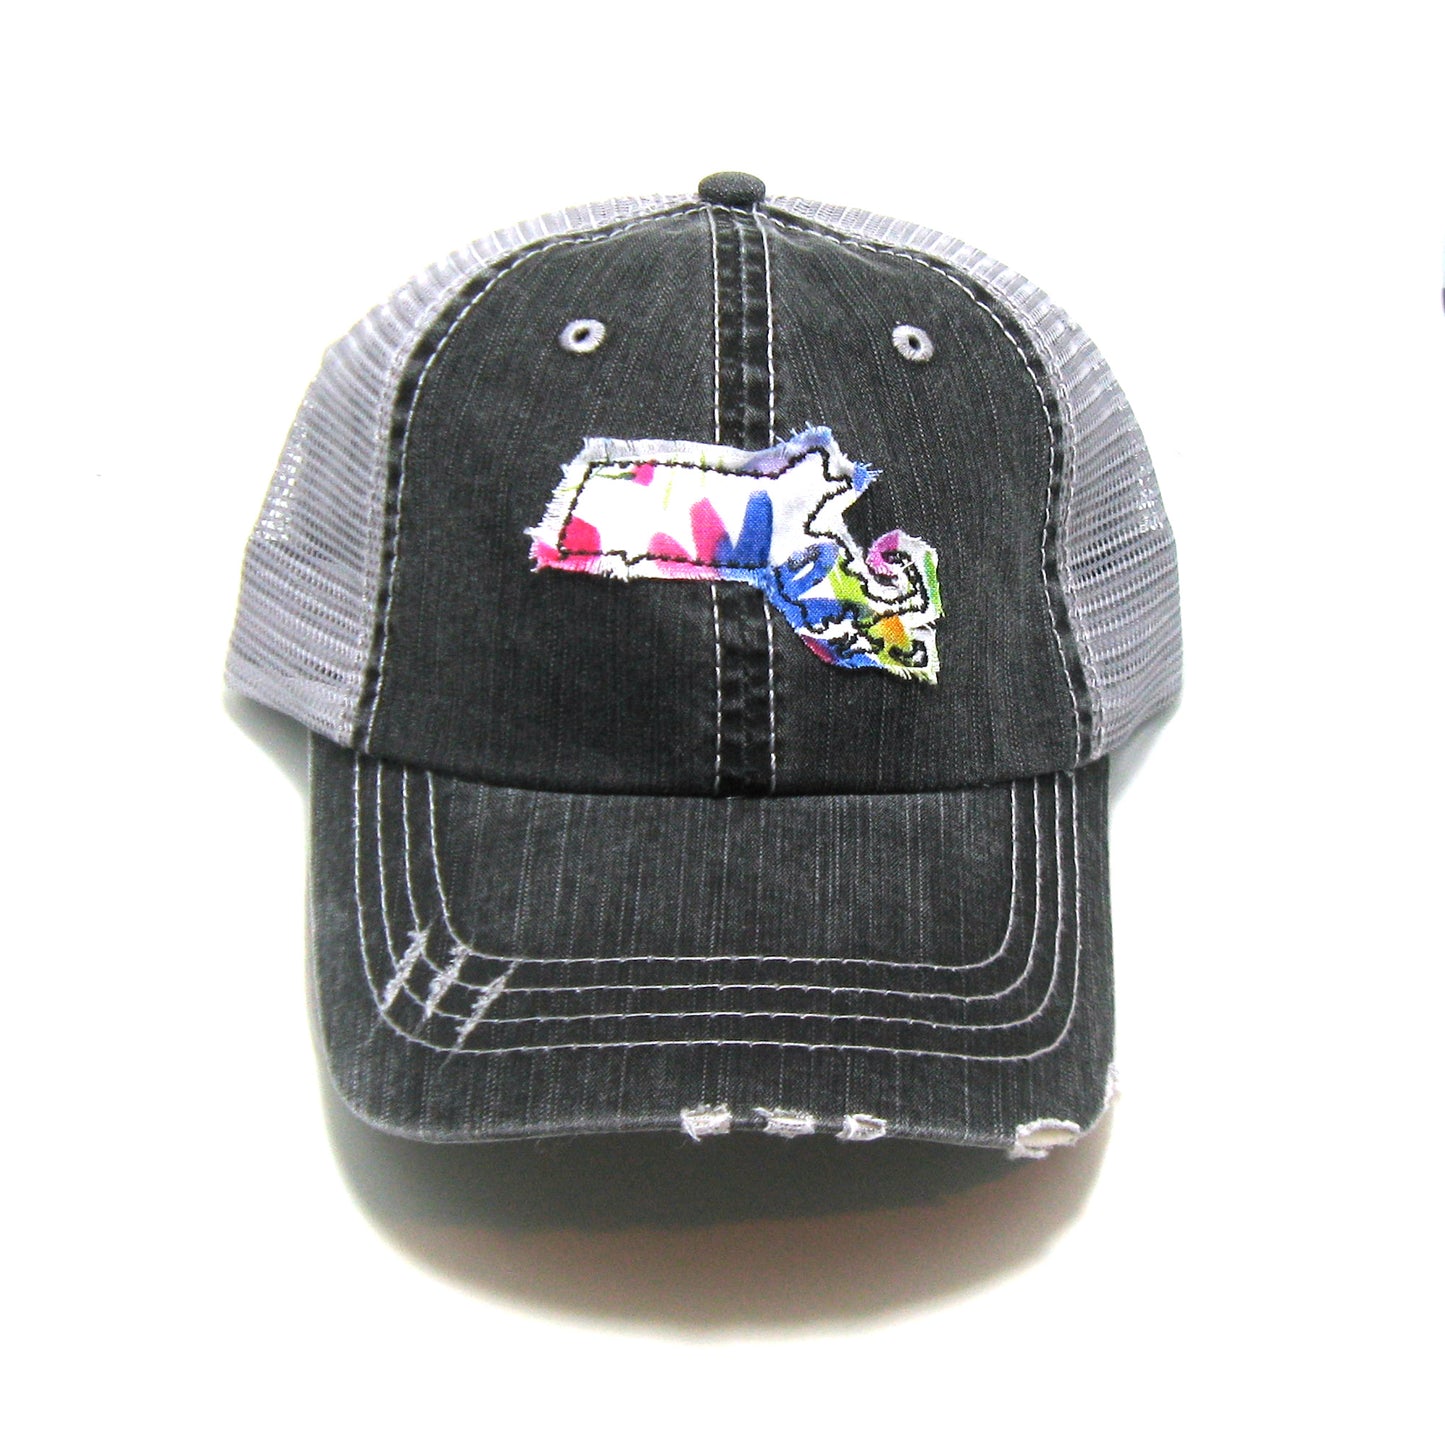 gray distressed trucker hat with gray floral fabric state of Massachusetts